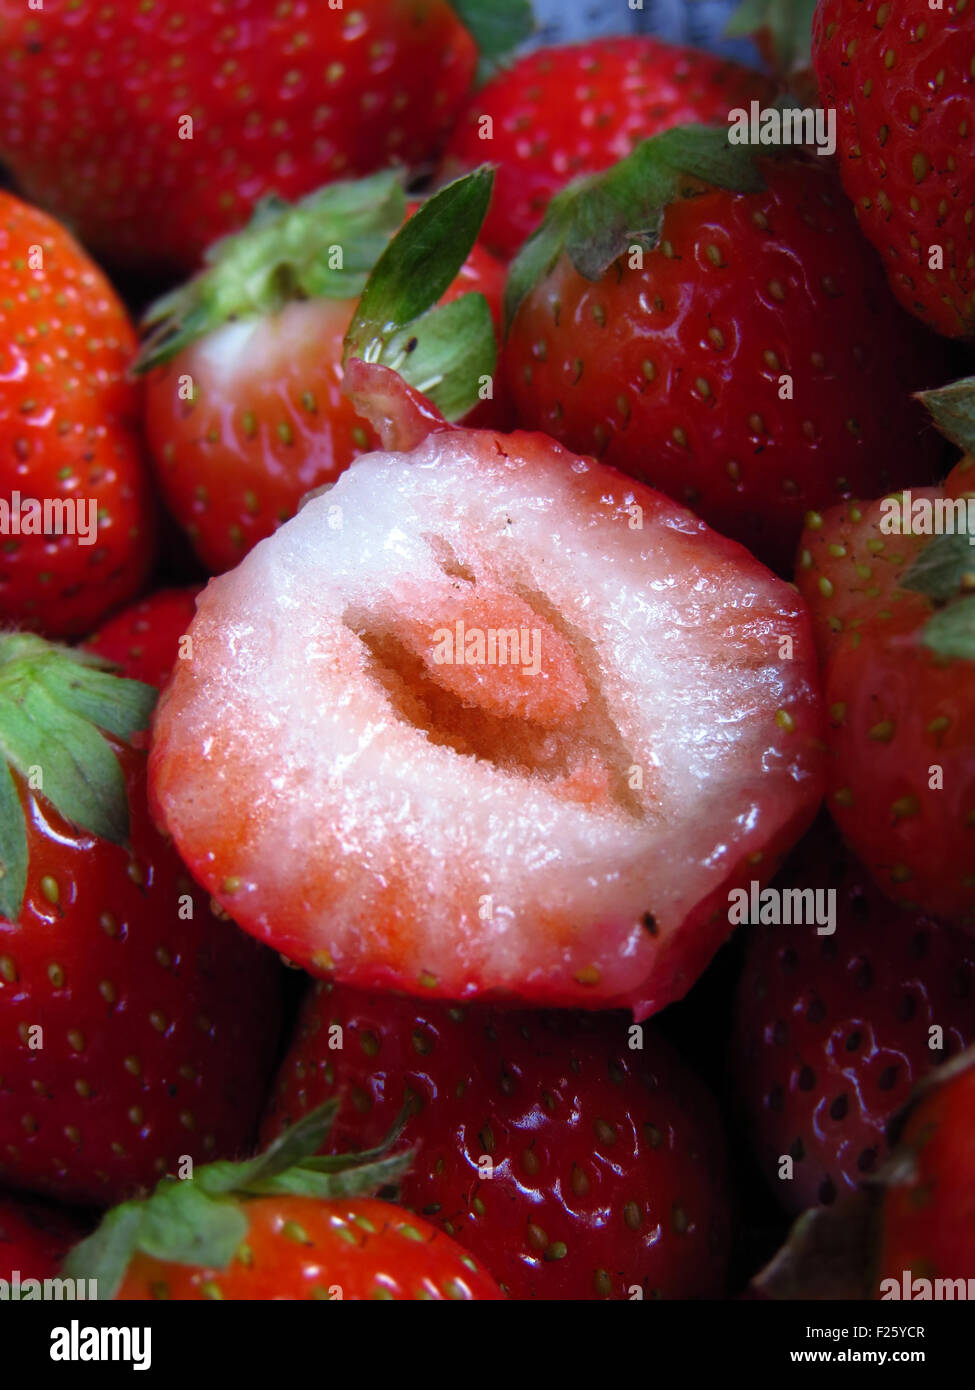 A cut delicious strawberry on a stack of fresh ripe strawberries. Stock Photo